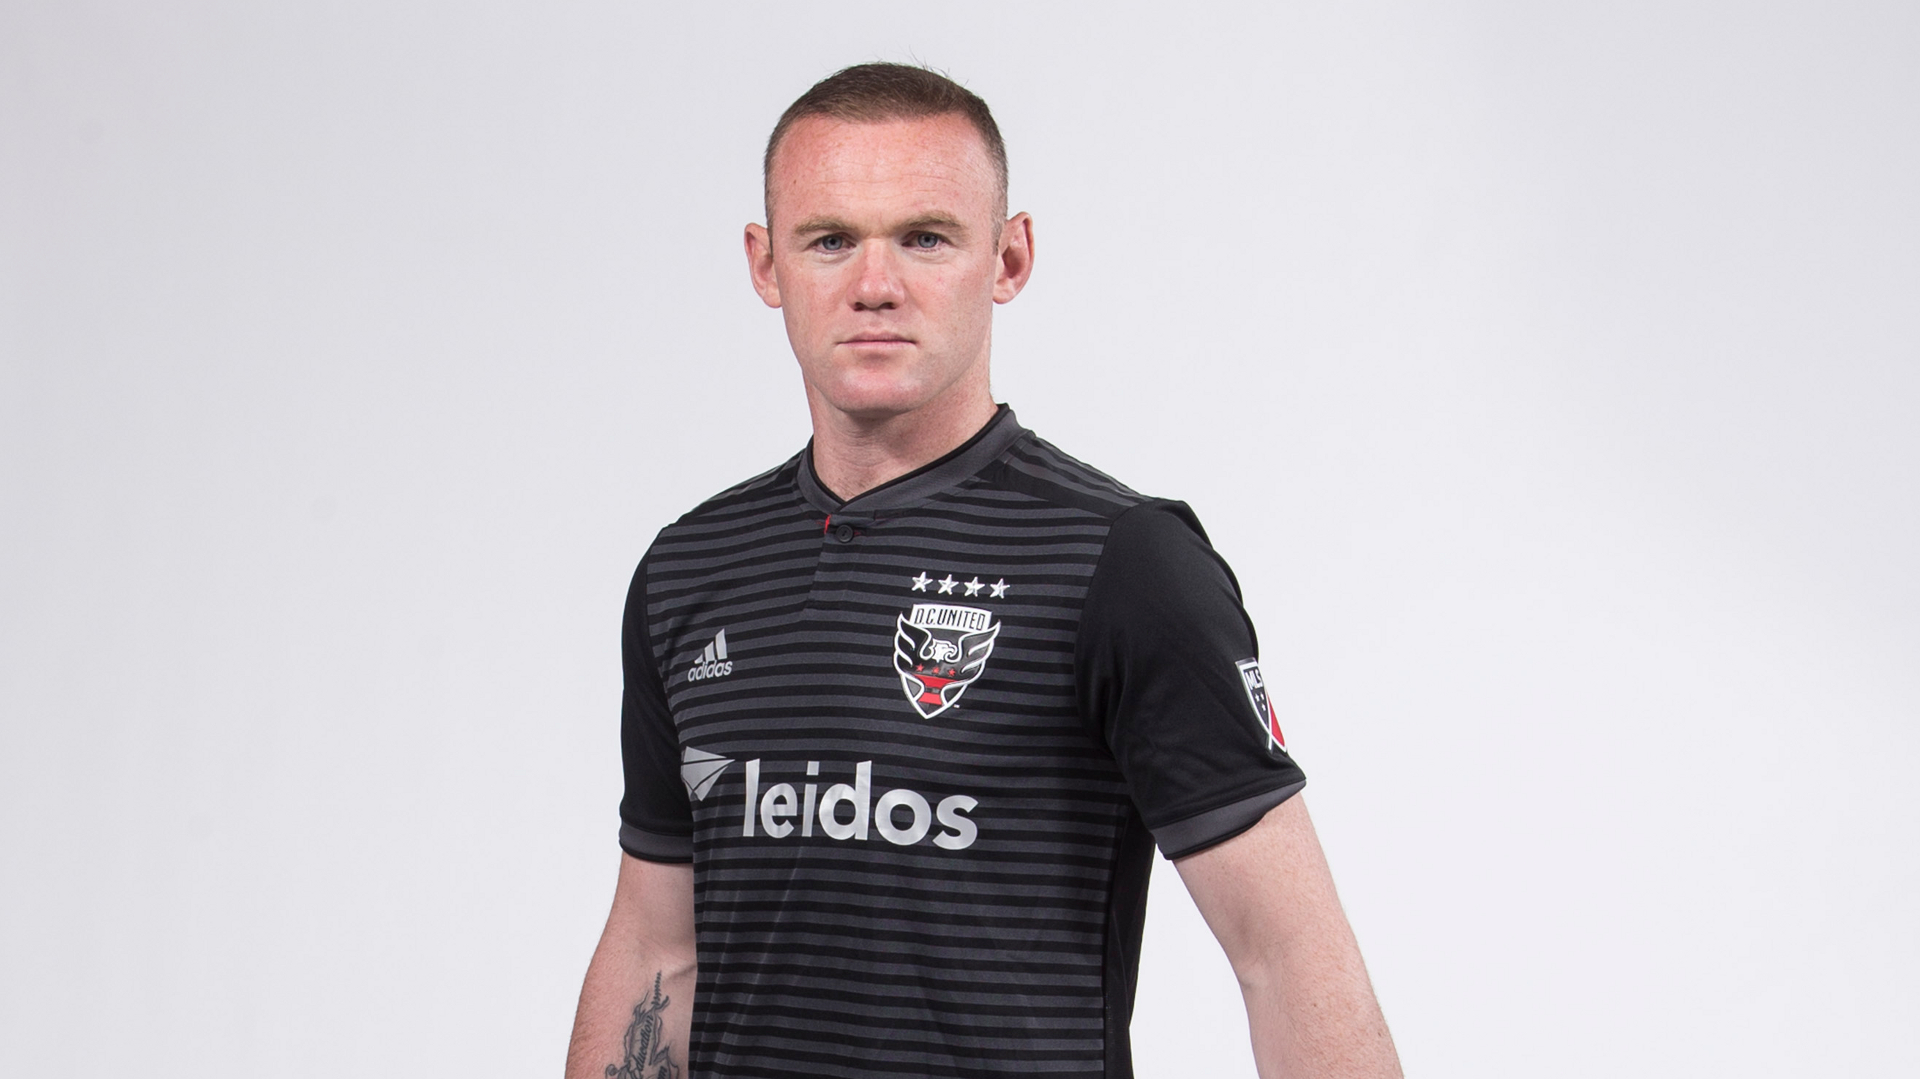 Video: Wayne Rooney joins DC United | Soccer | Sporting News